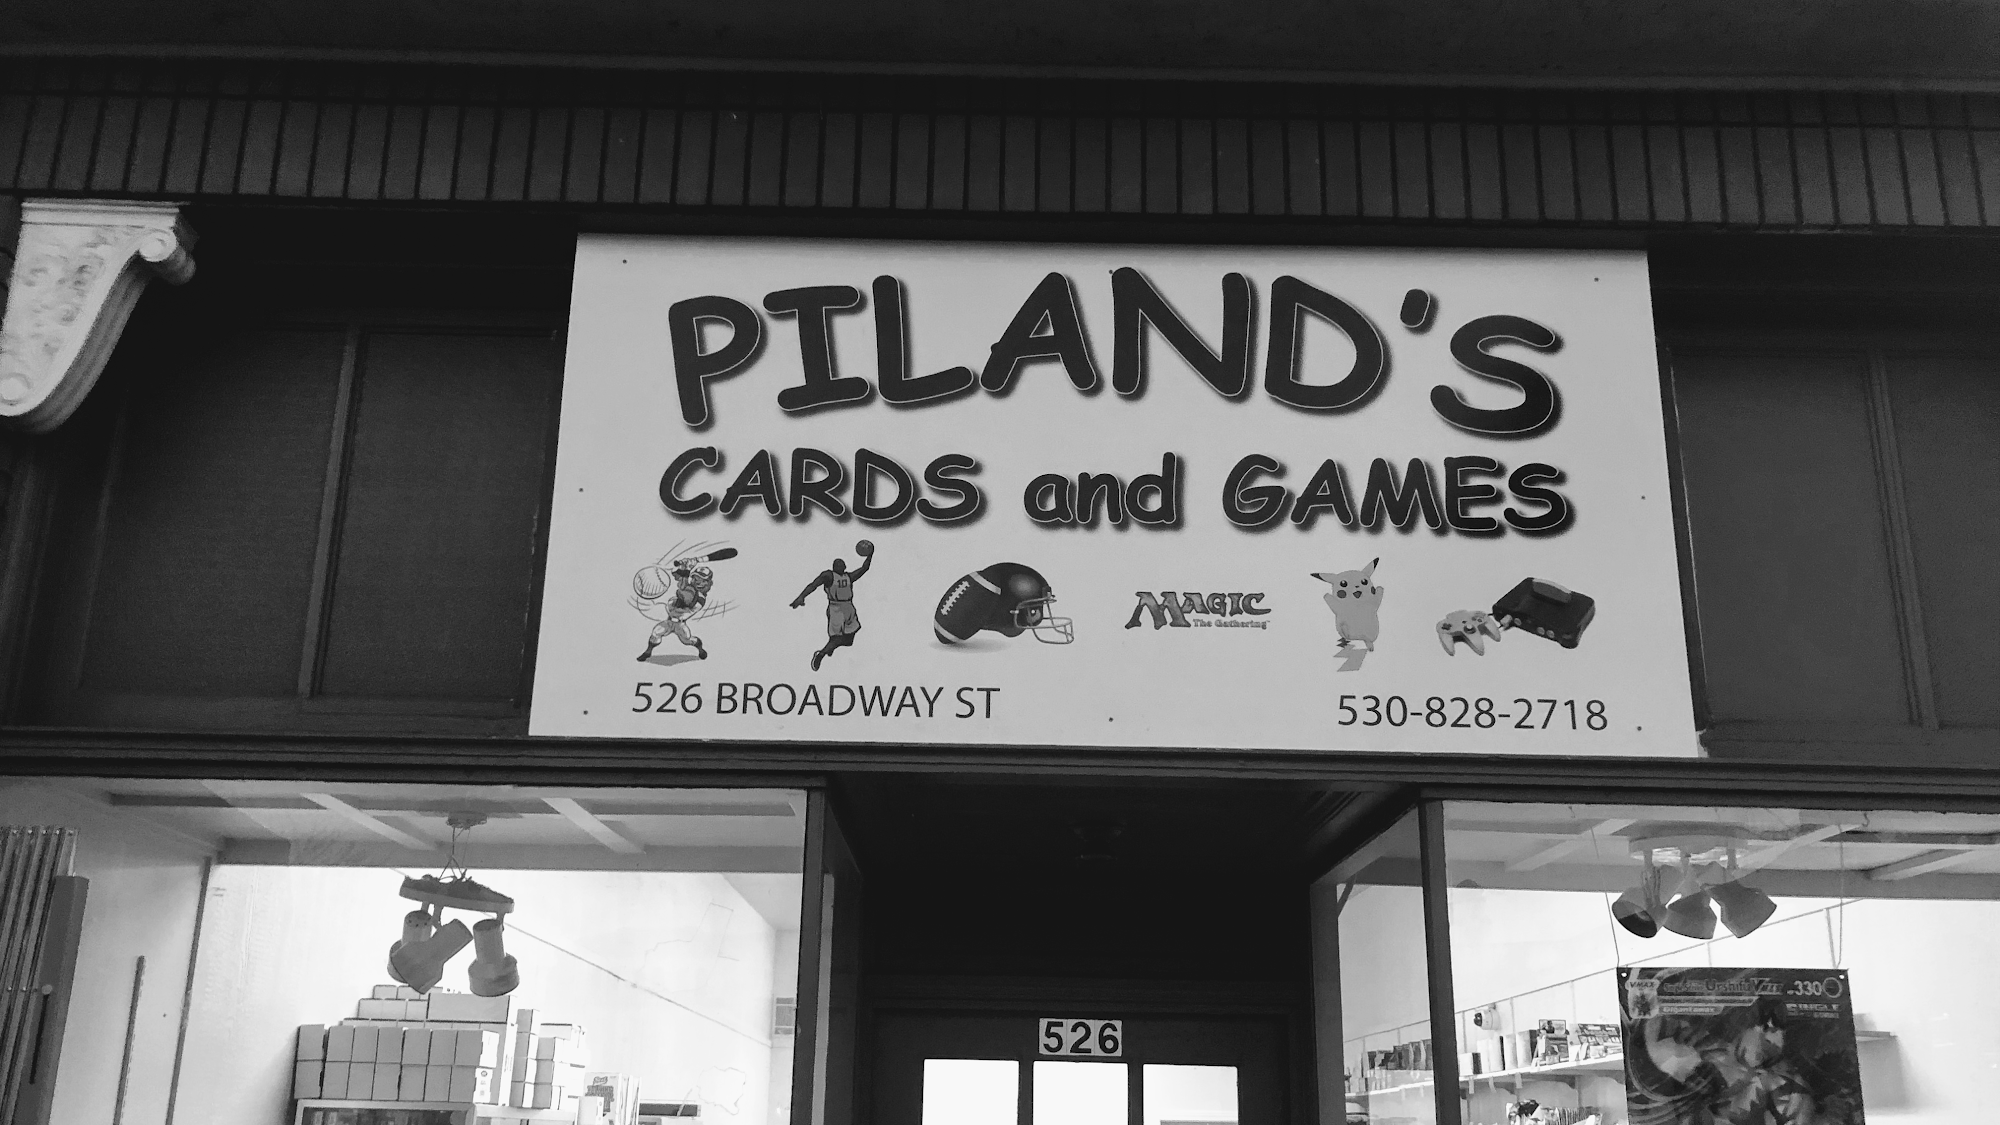 Piland’s Cards and Games